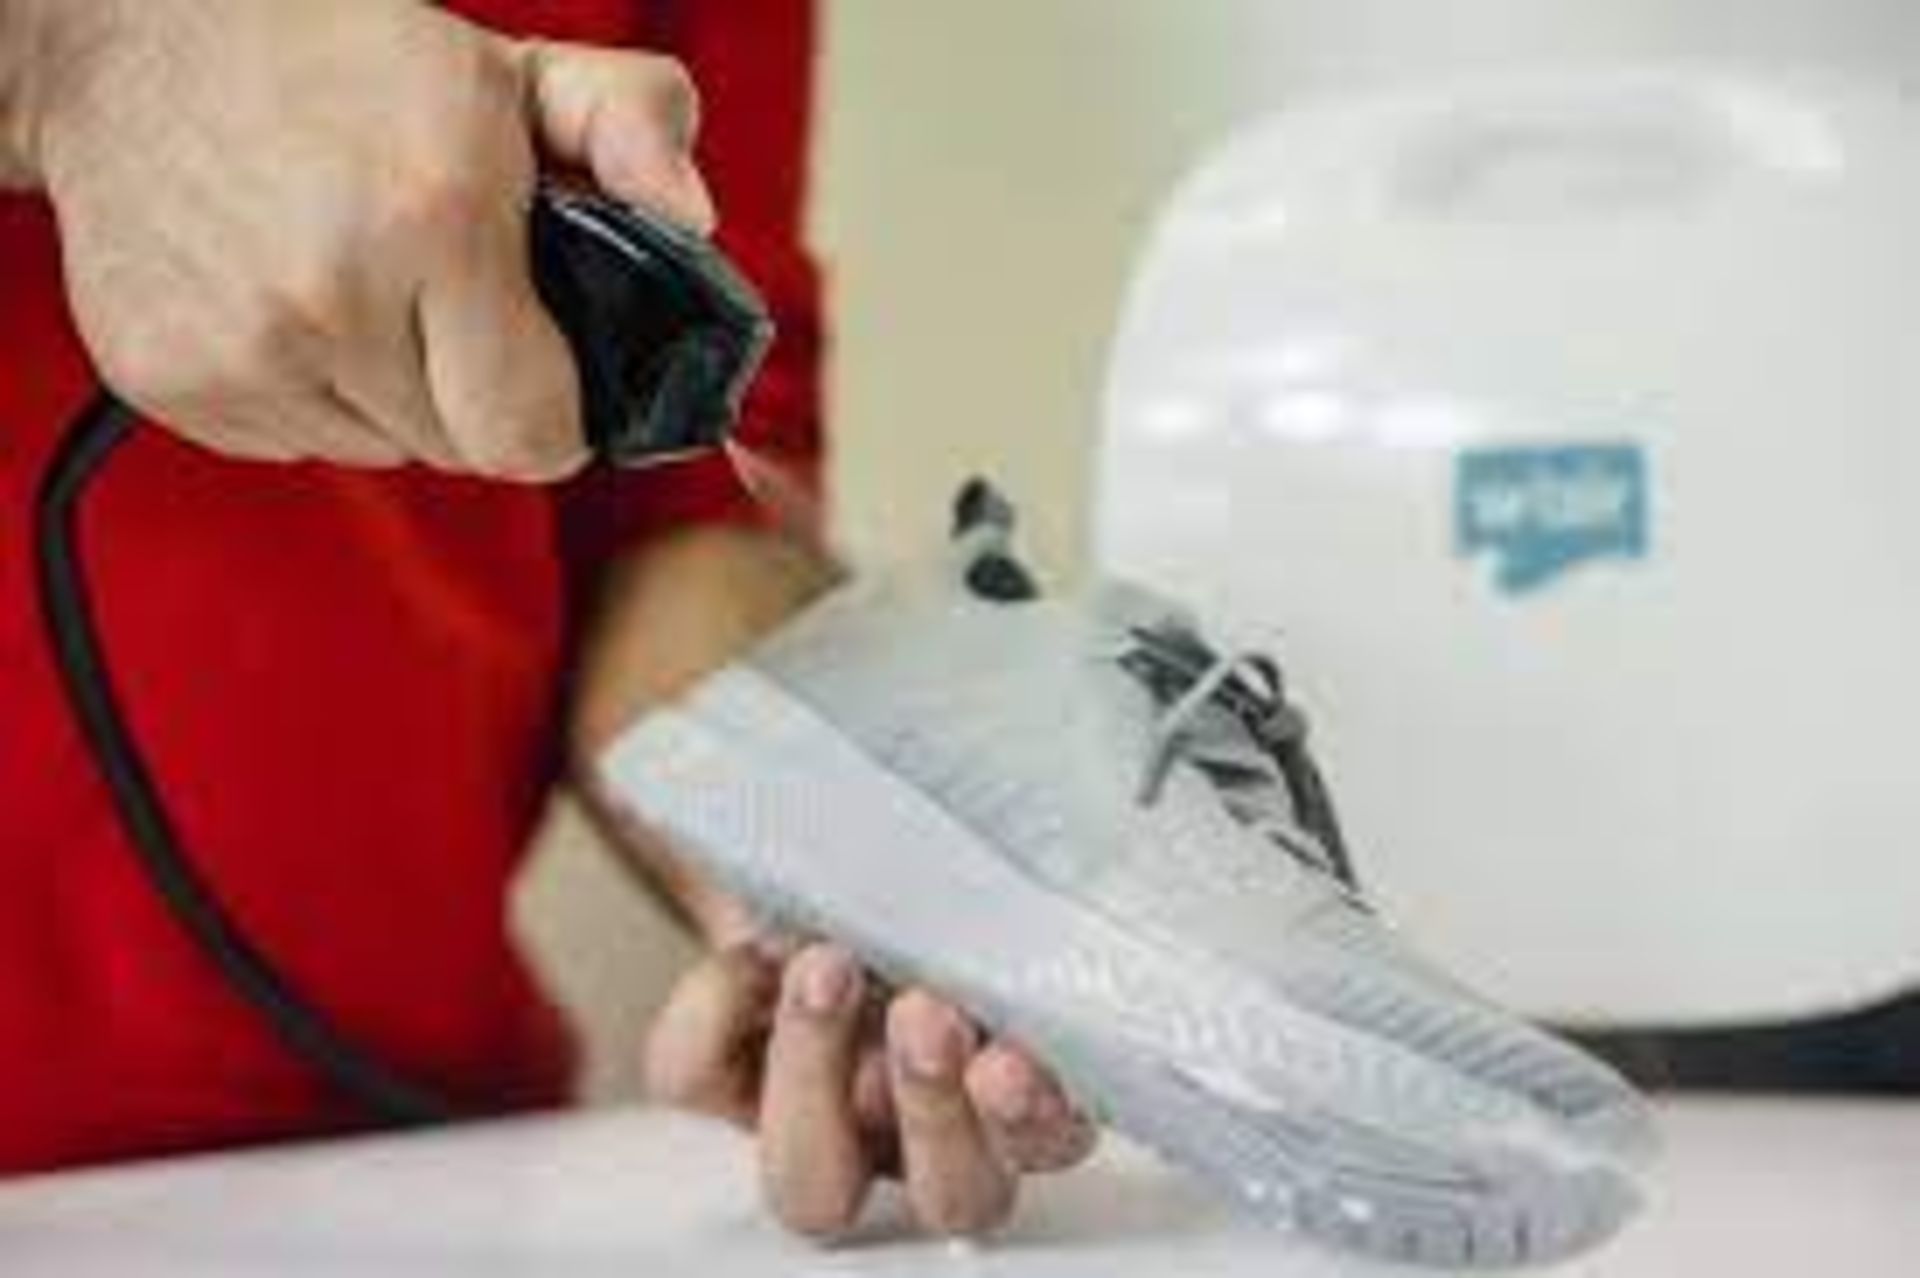 20 X BRAND NEW W'AIR SNEAKER CLEANING SYSTEMS RRP £299, The w'air uses hydrodynamic technology - Image 4 of 6